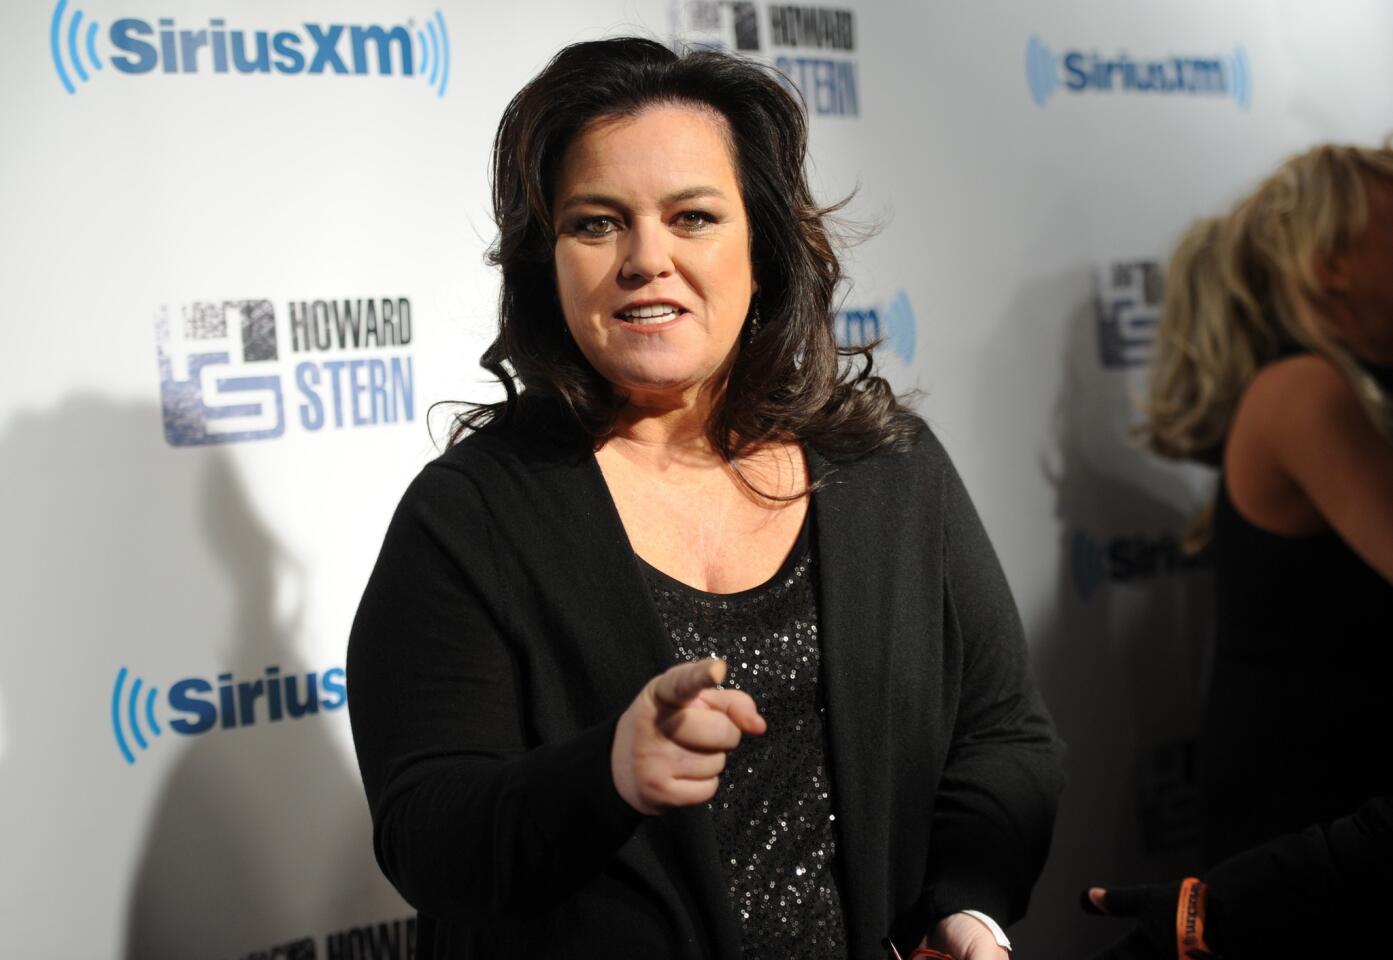 Rosie O'Donnell posts photos showing major weight loss